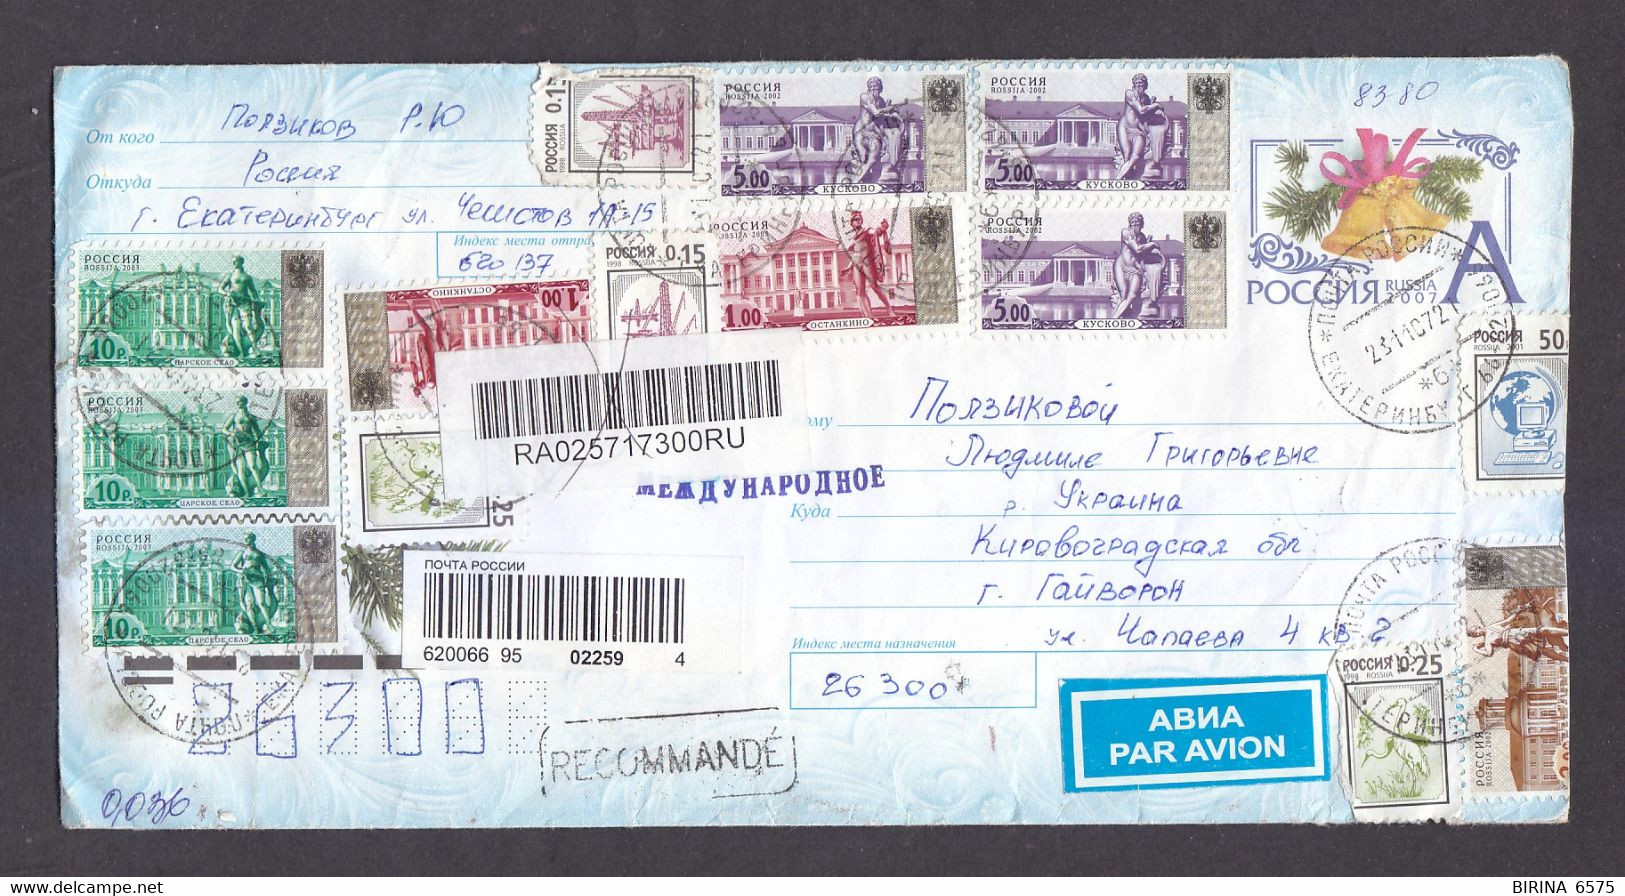 Envelope. RUSSIA. 2007. - 2-52 - Covers & Documents